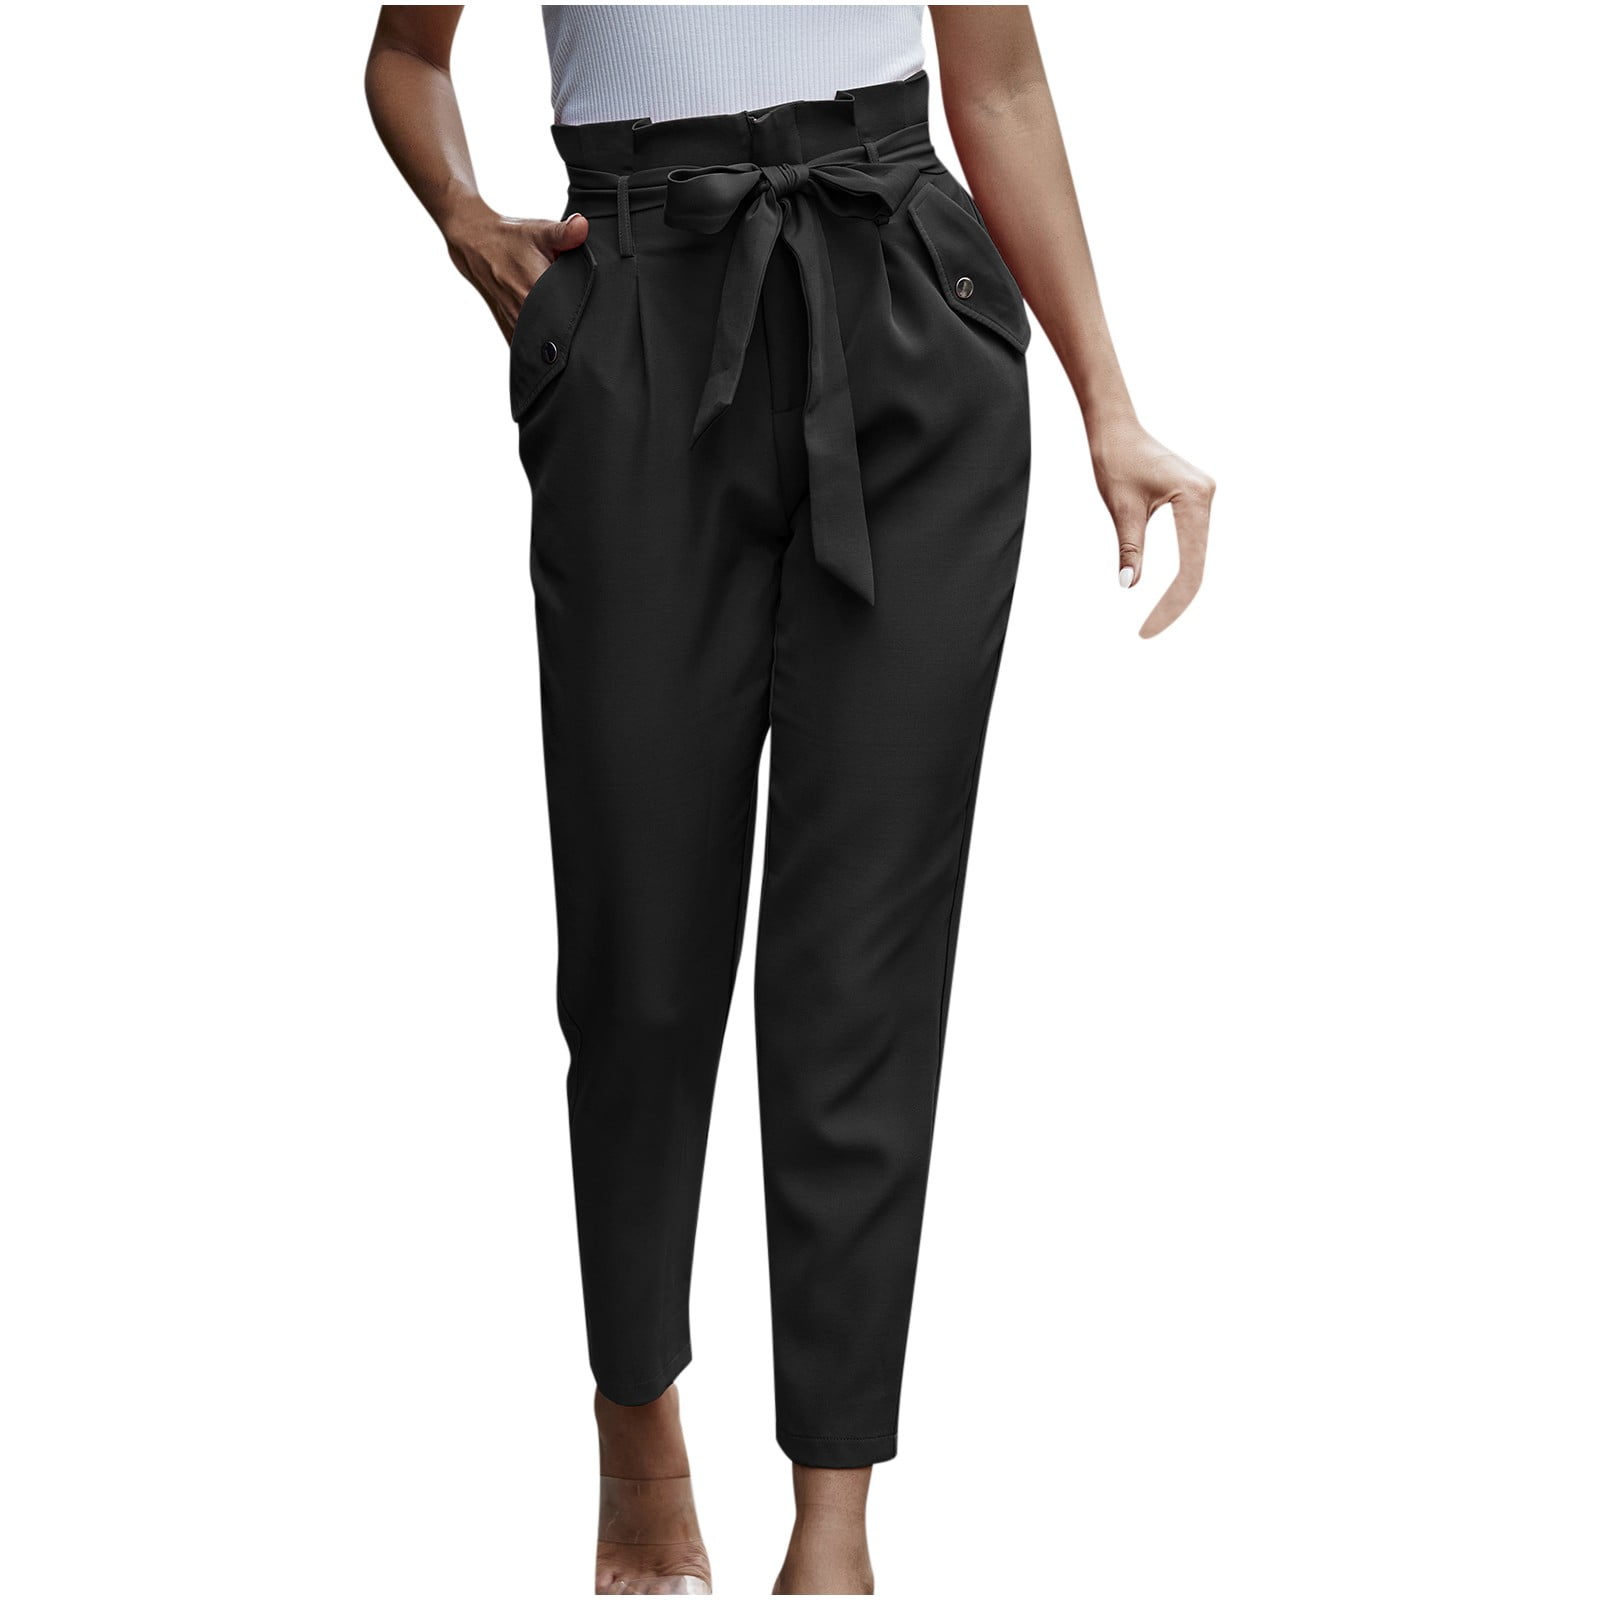 Aayomet Dress Pants Women Ladies Autumn And Winter Style Lace Up Pocket  Tooling Long Solid Color Casual Elastic Beach Pants,Black XL